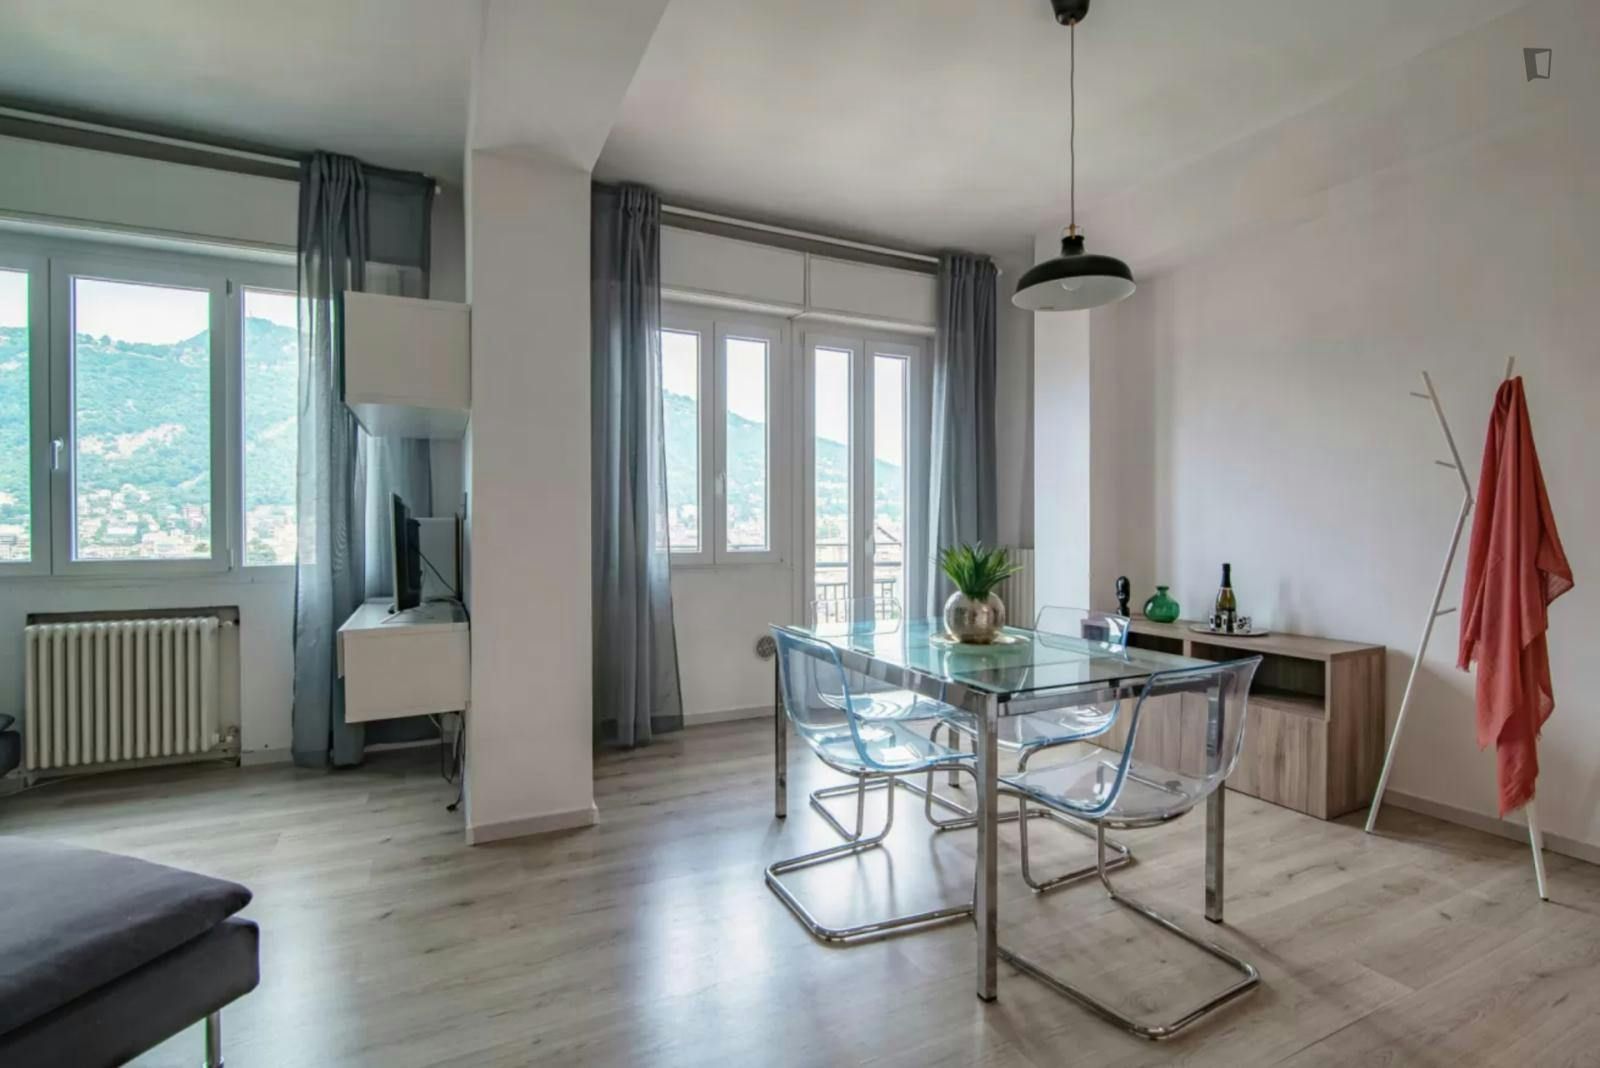 Neat 2-bedroom flat close to S. Giovanni train station